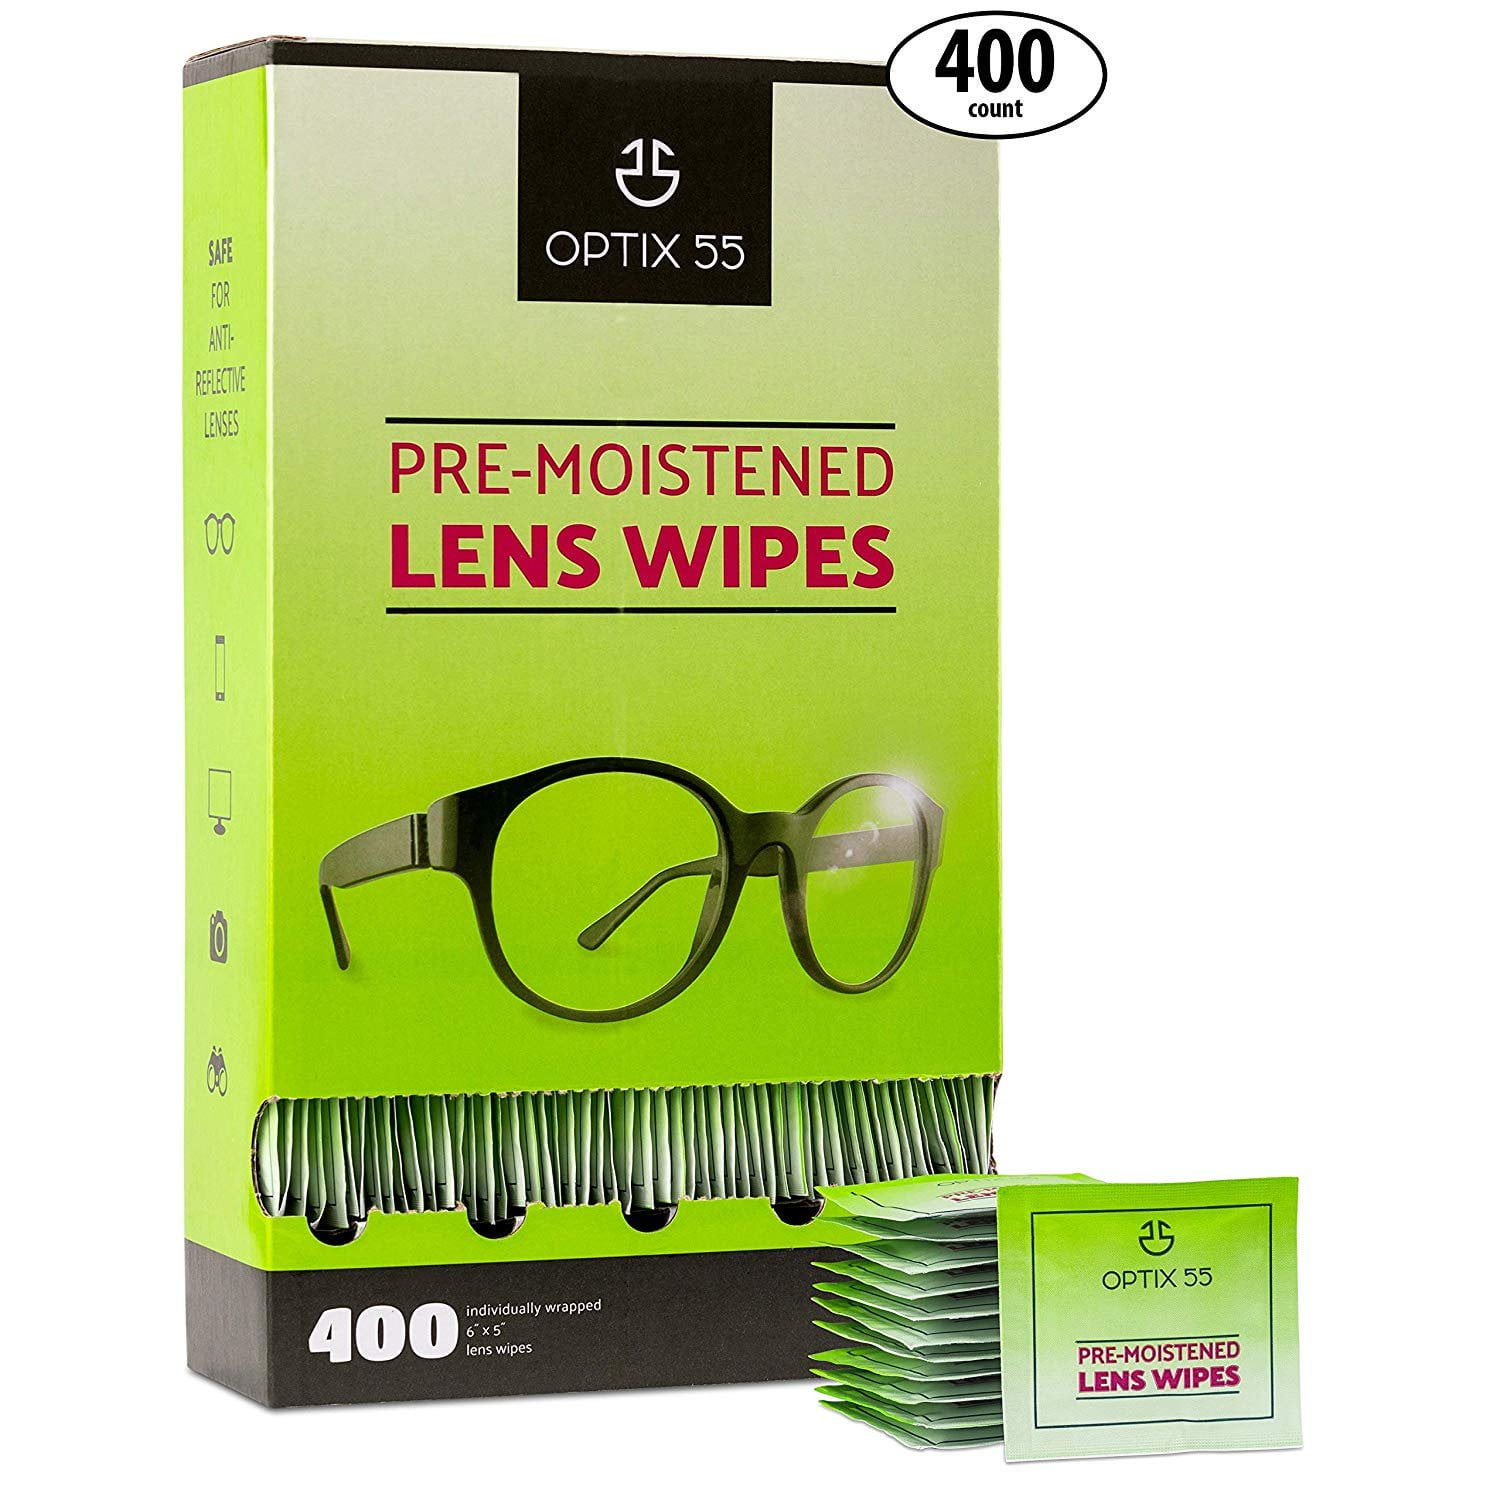 Pre-Moistened Lens Wipes - 400 Individually Wrapped Cloths - Eyeglasses